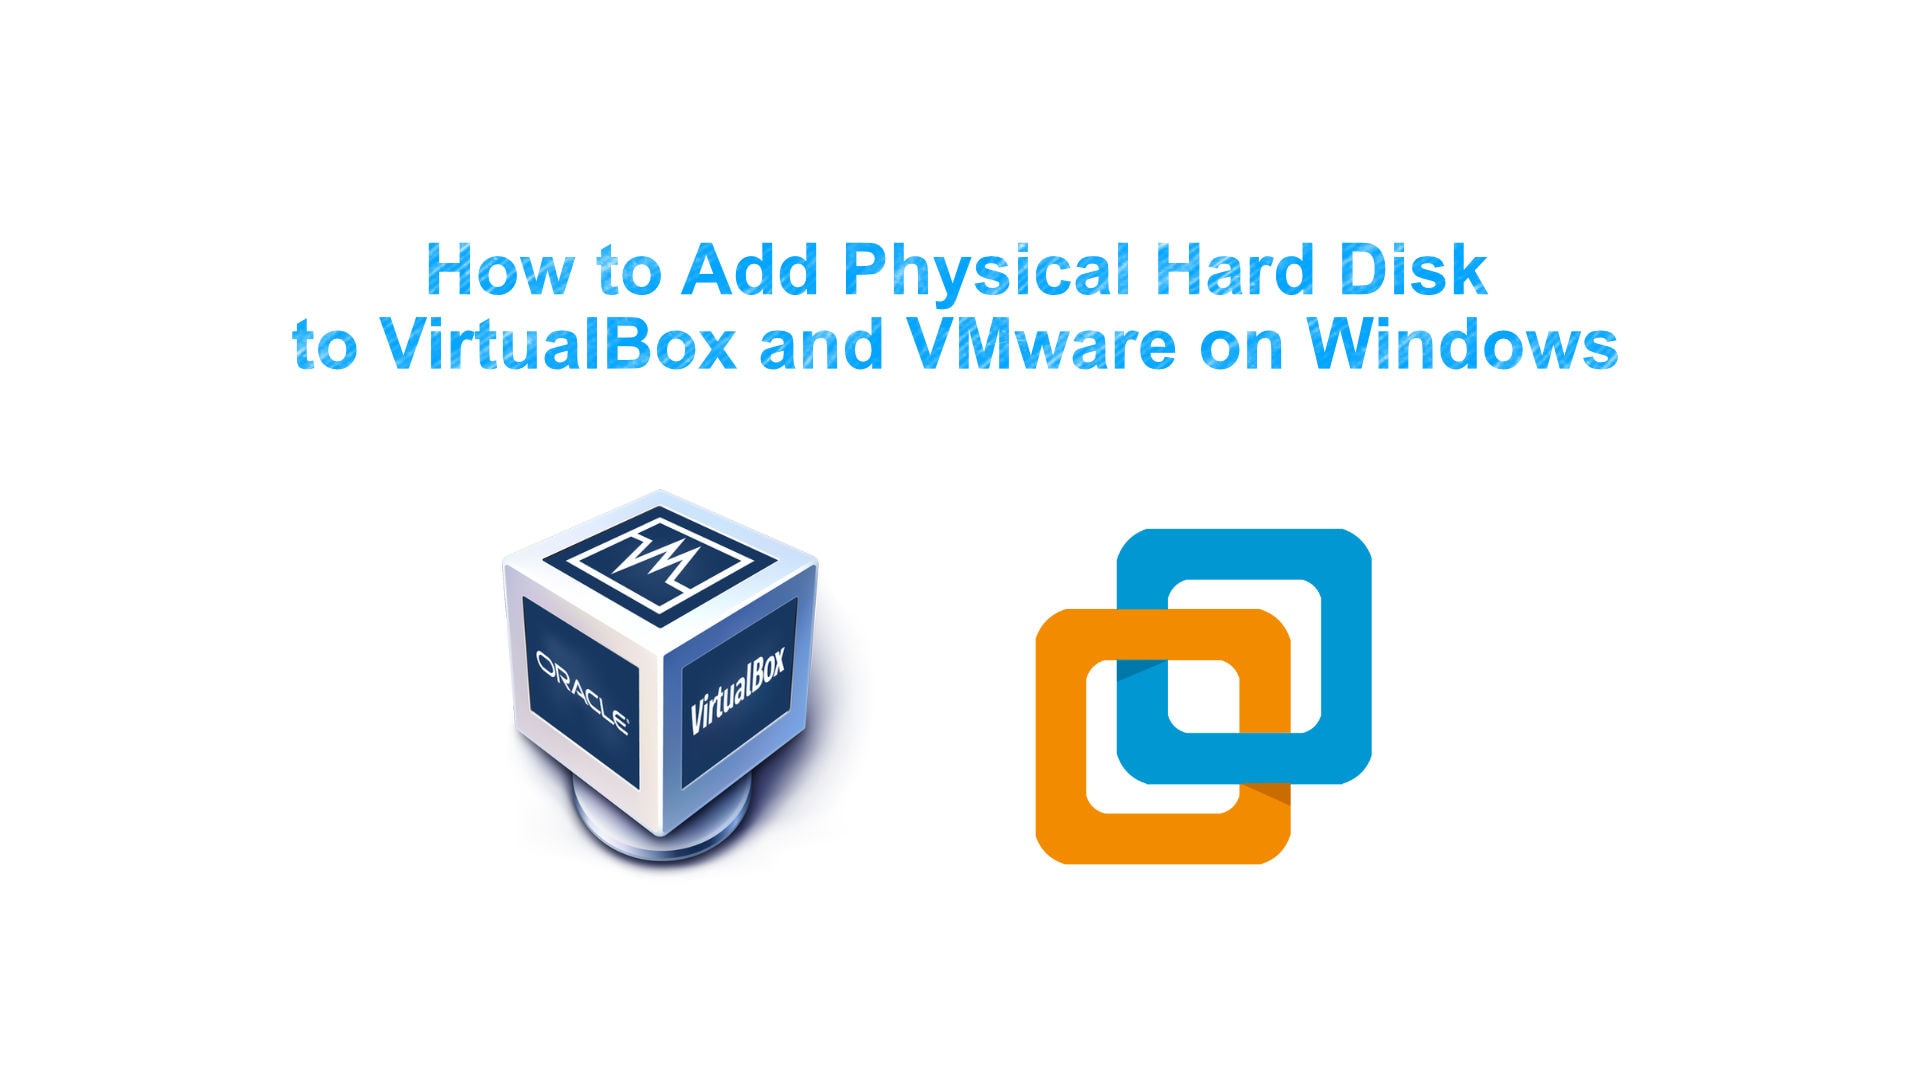 How to Add Physical Hard Disk to VirtualBox and VMware on Windows